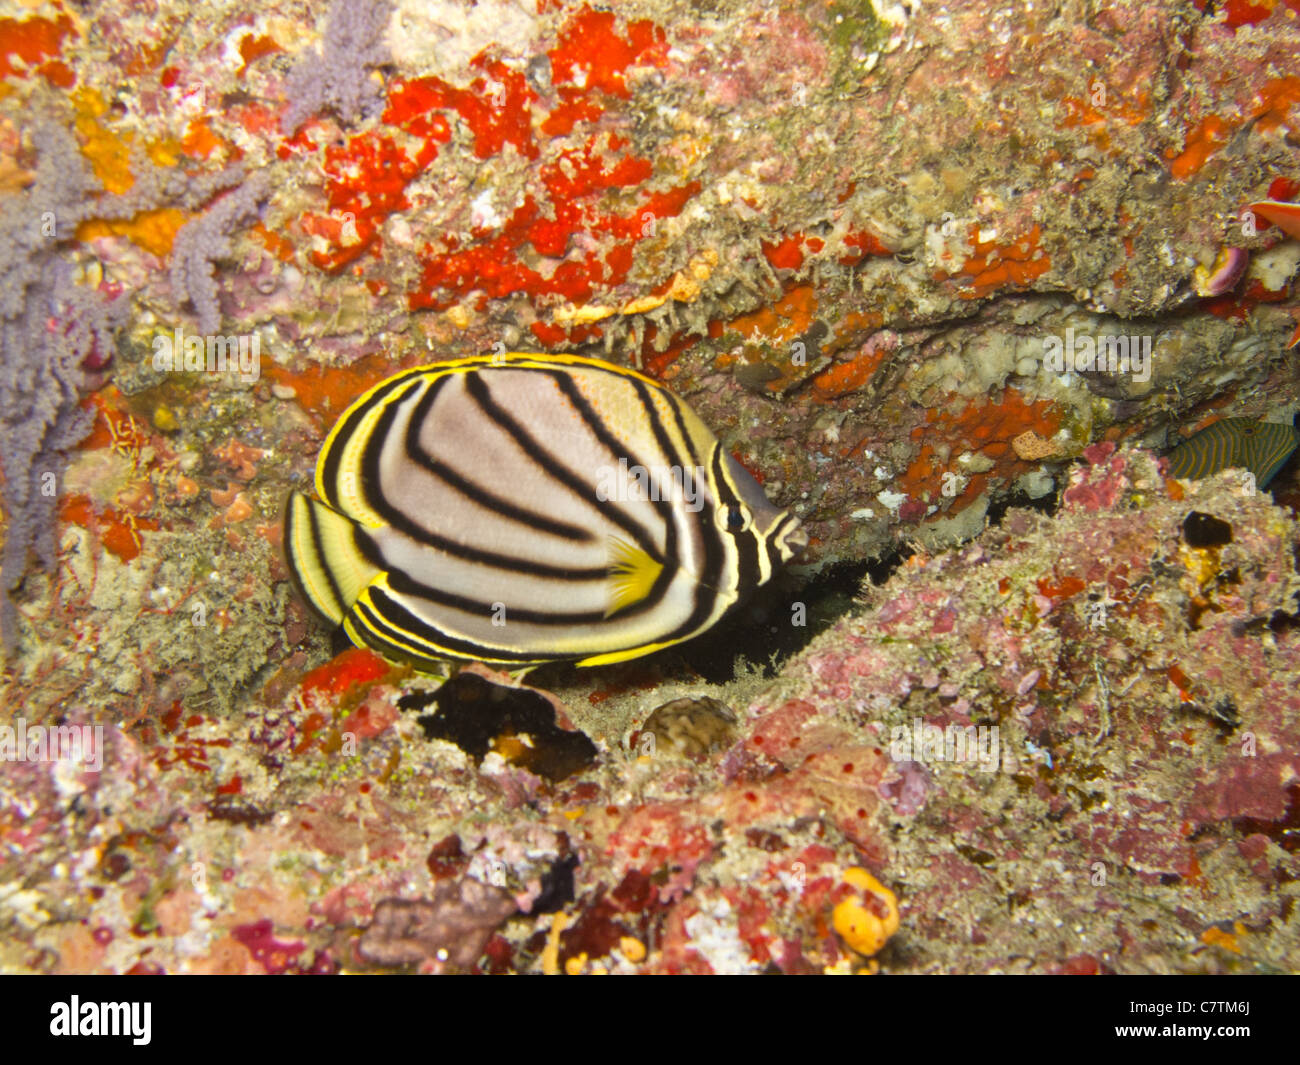 Sole Meyer's Botterflyfish in a coral reef Stock Photo